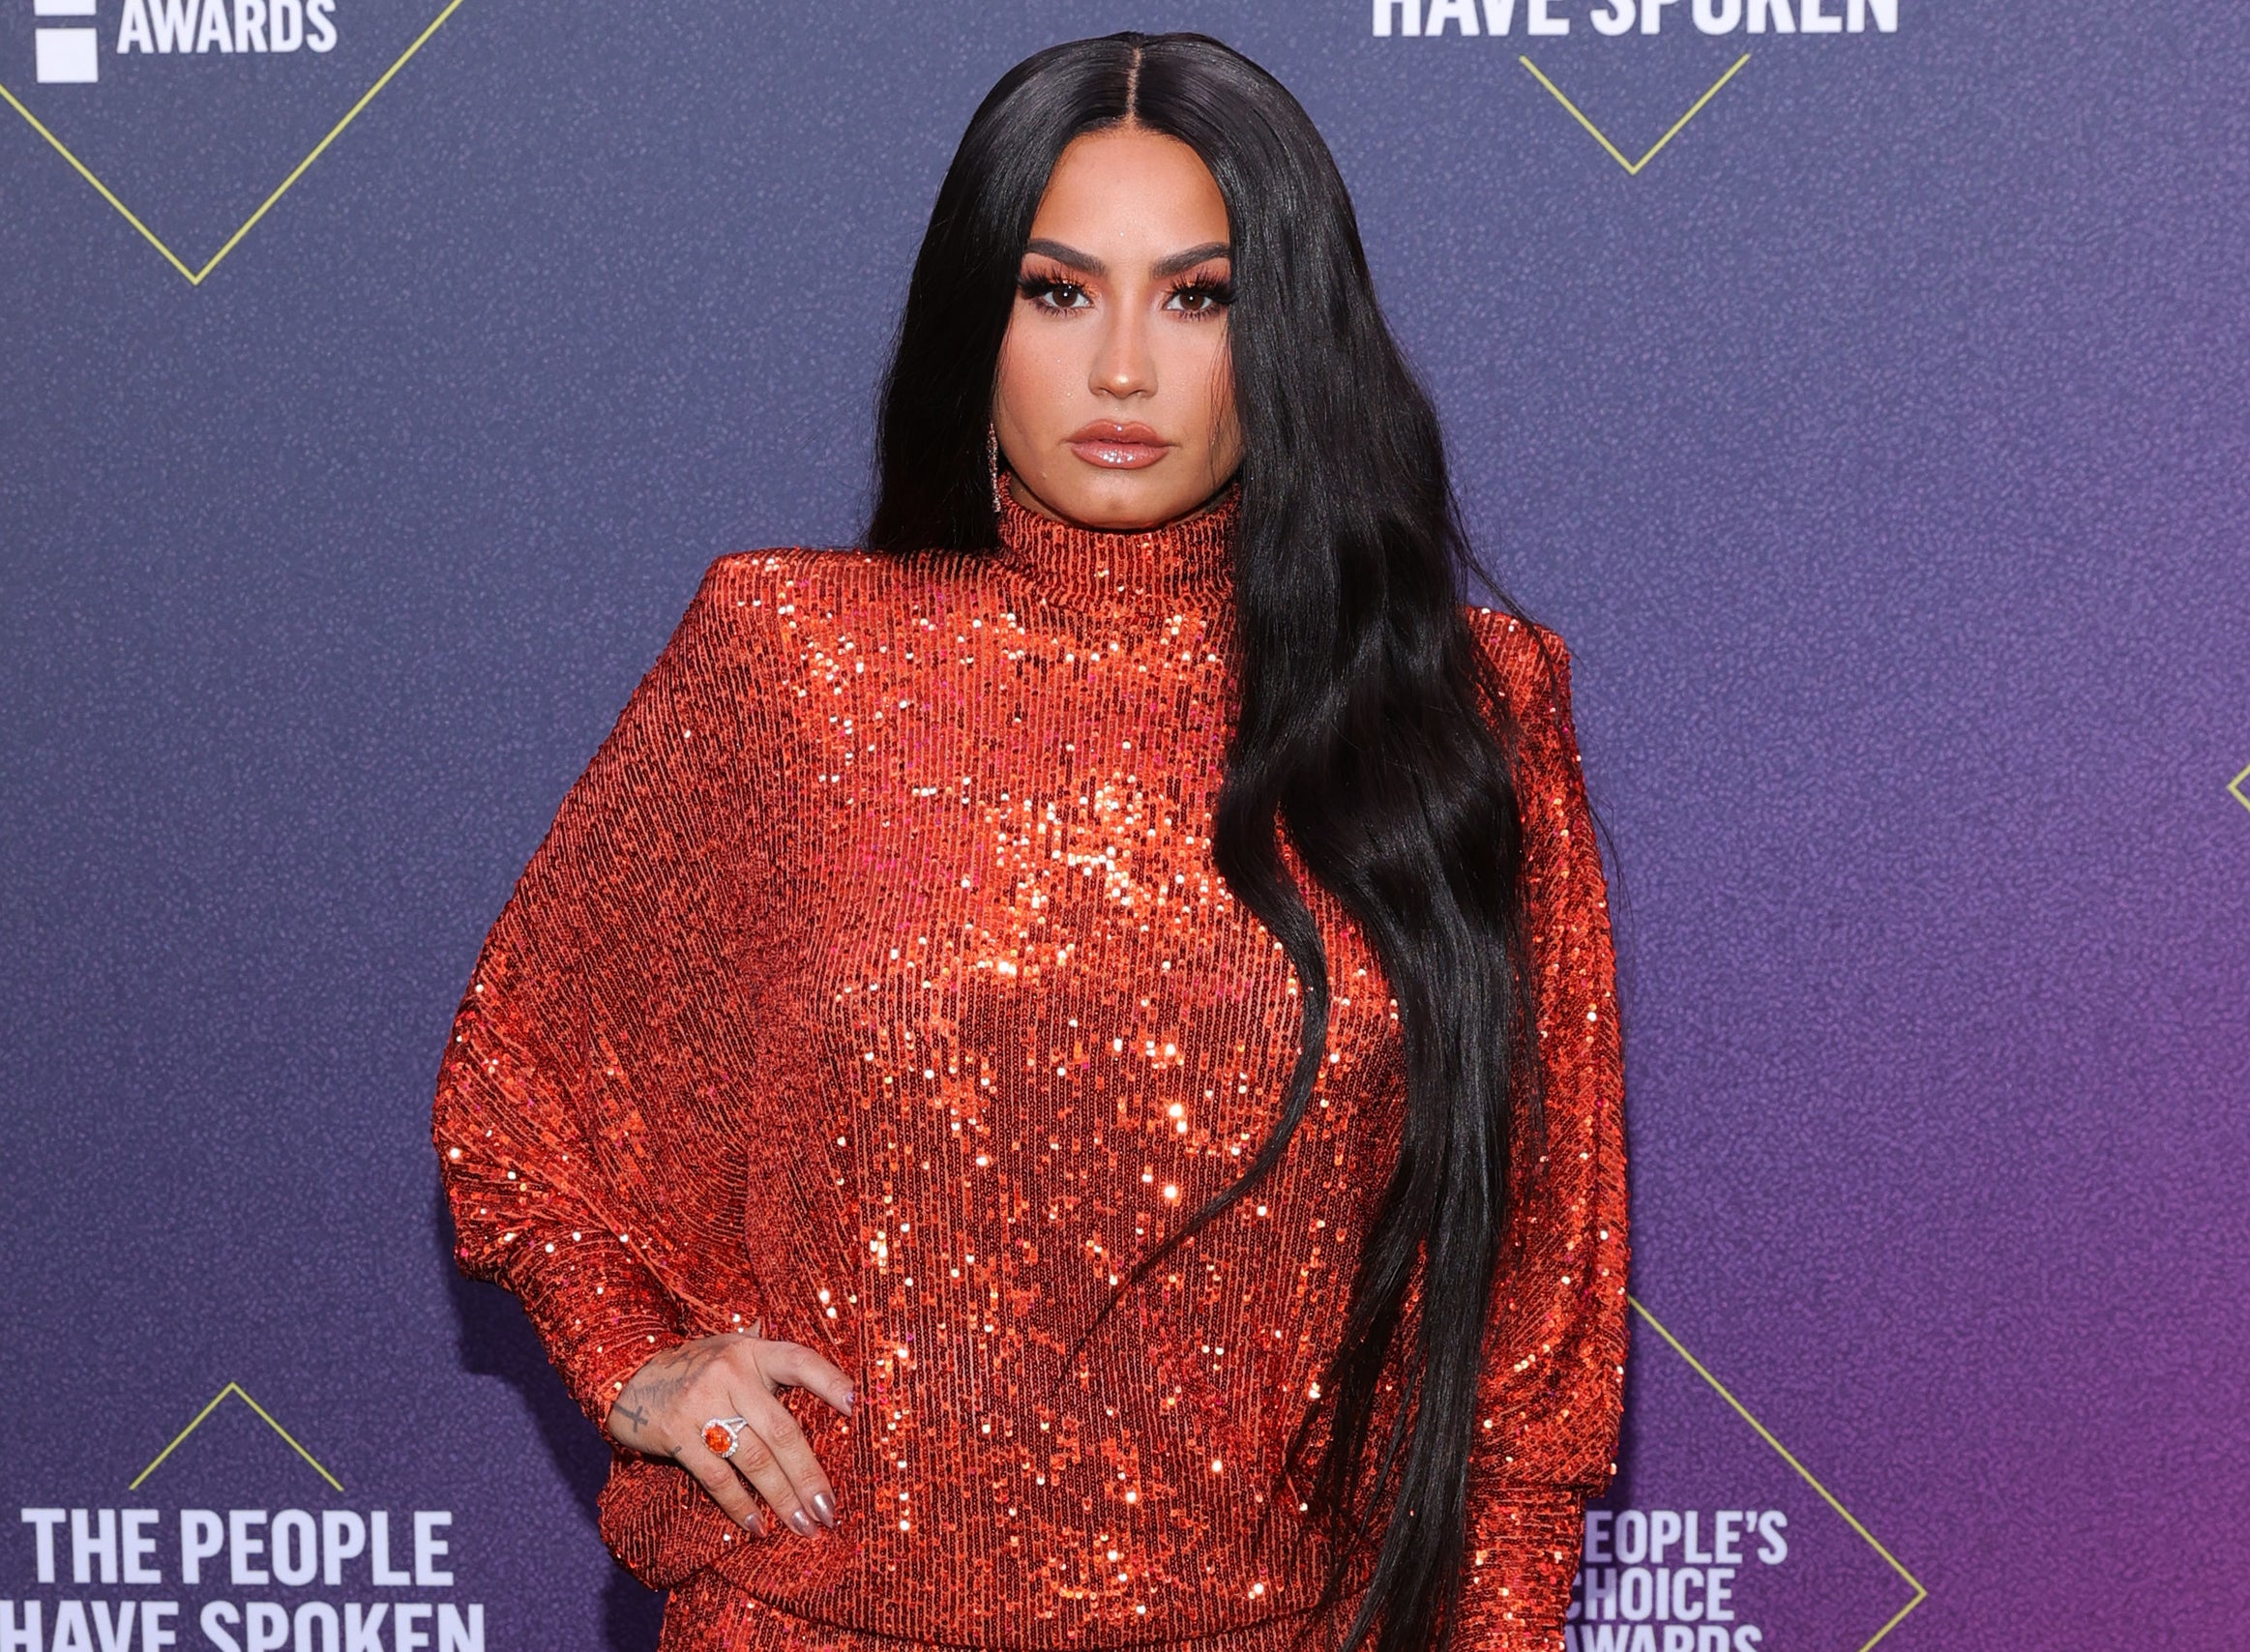 Demi wears a sparkling red jumpsuit at an event